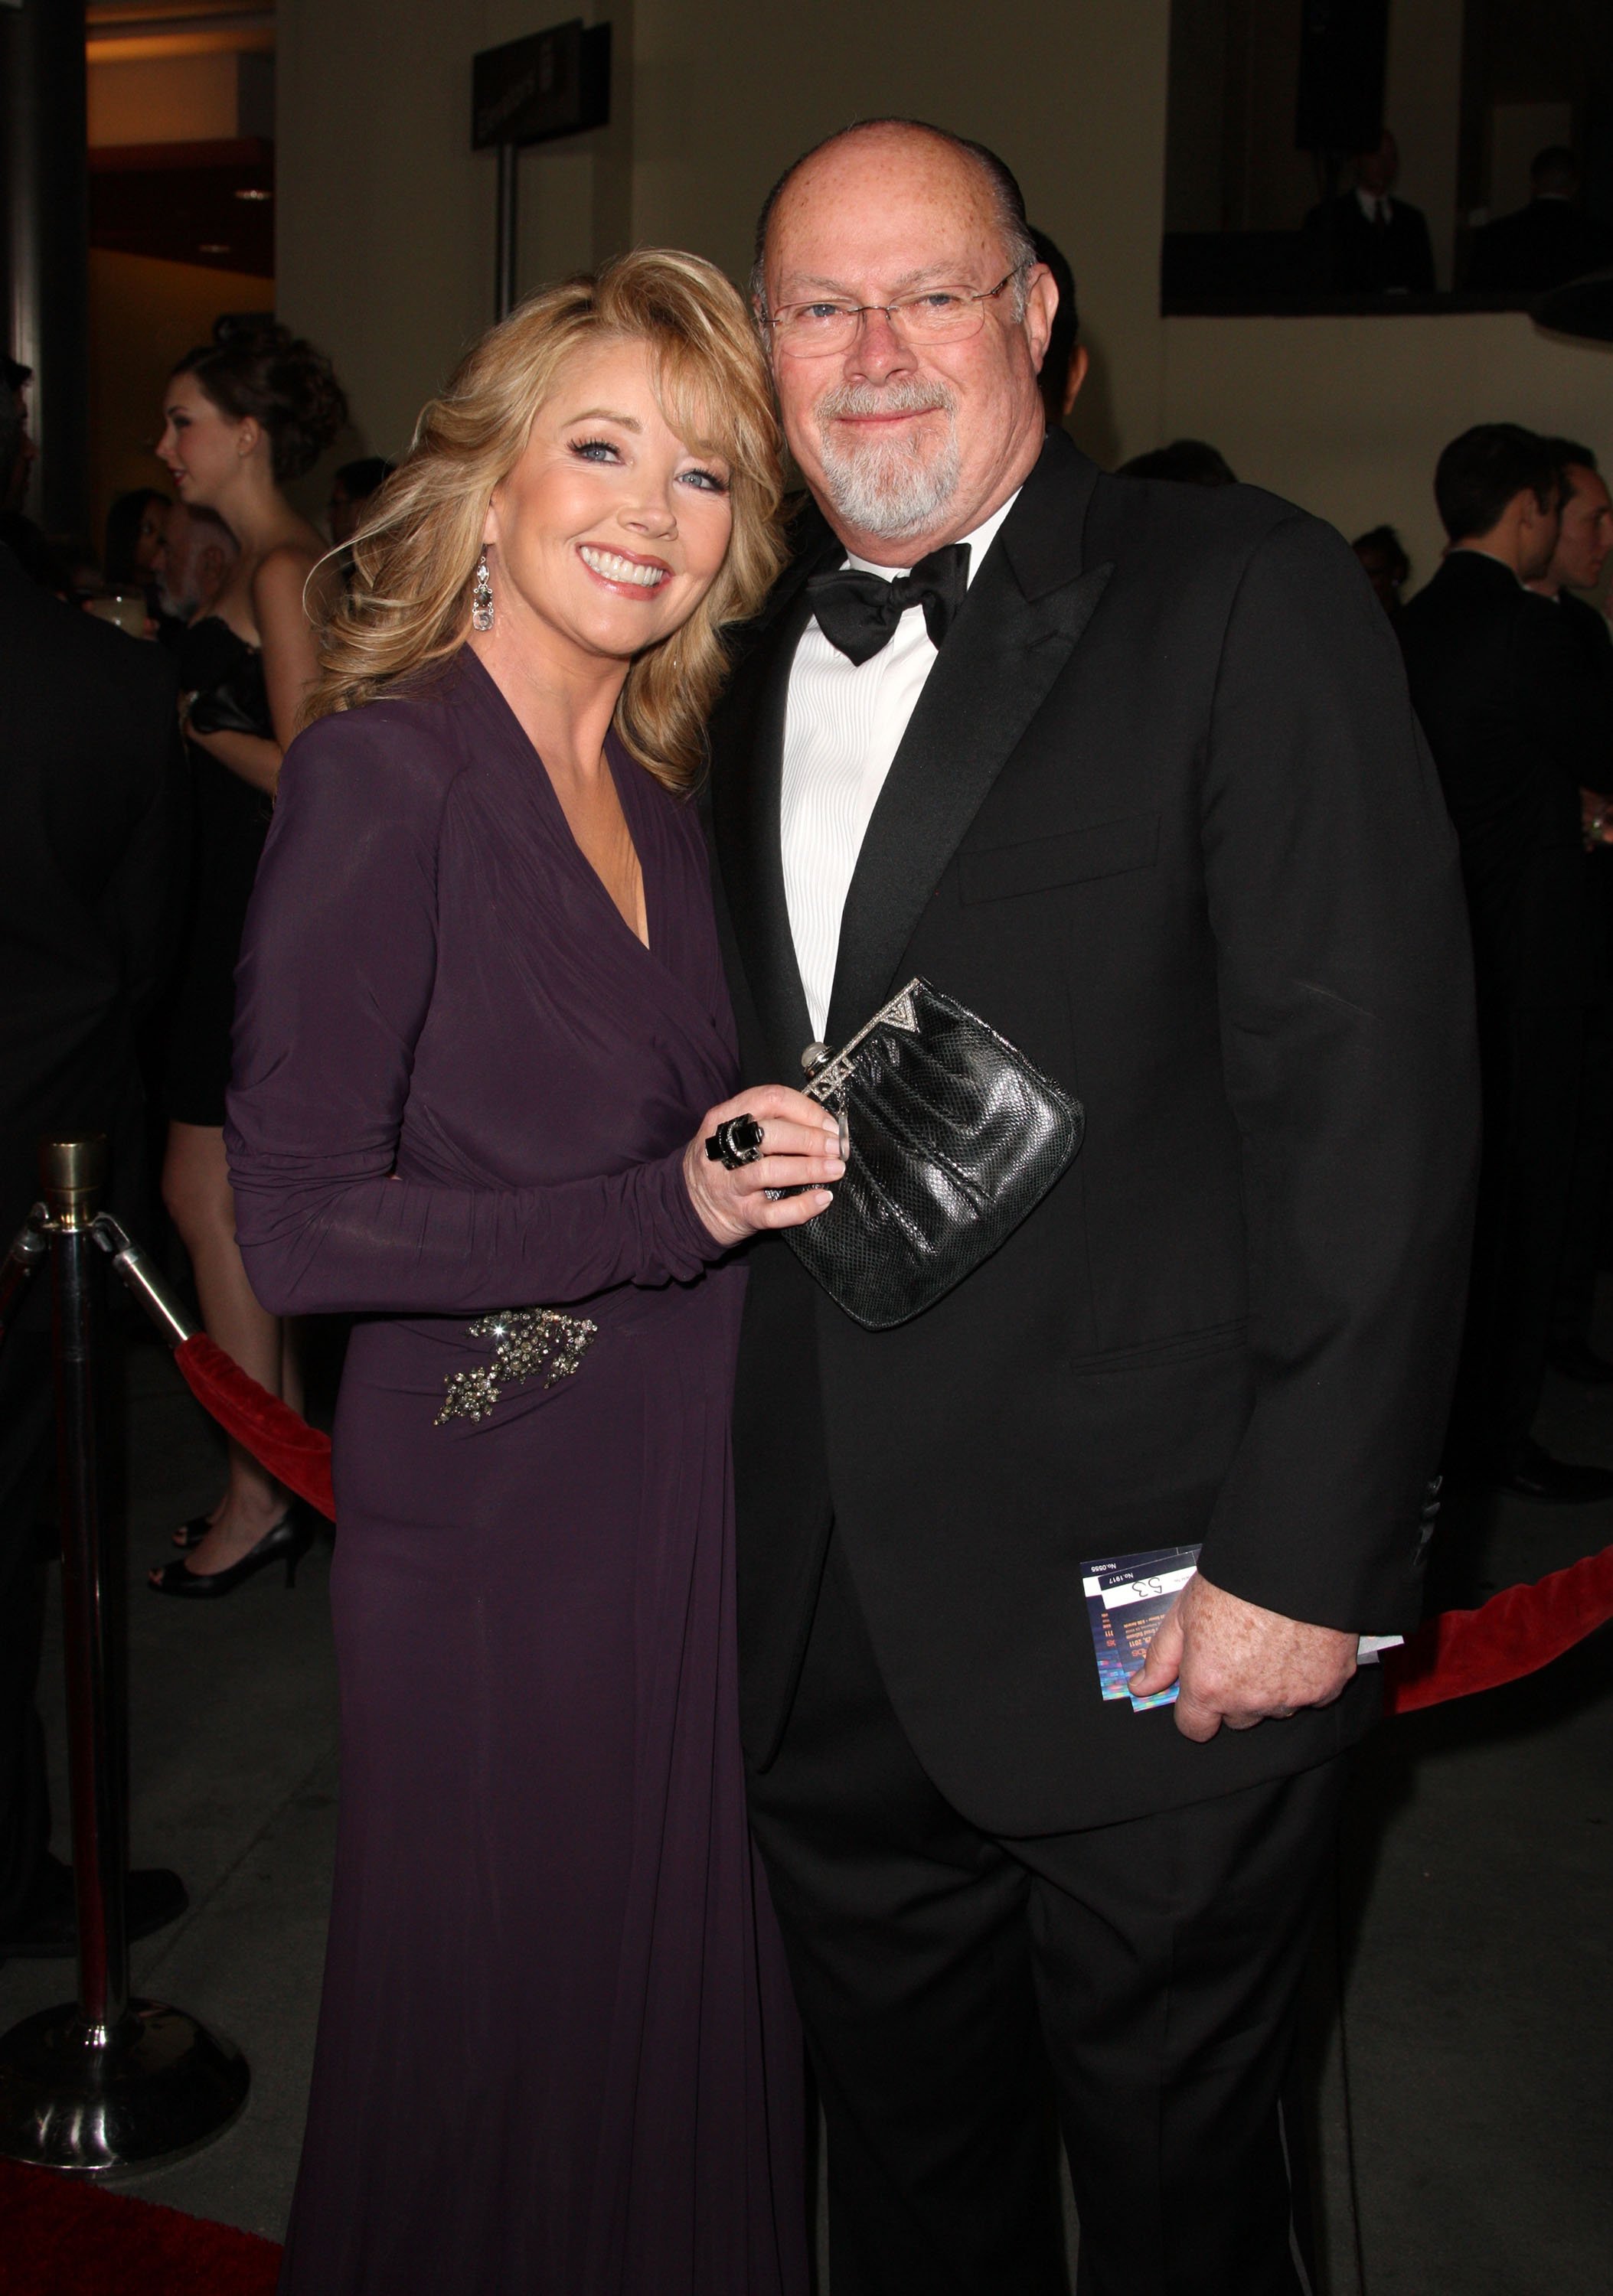 Actress Melody Thomas Scott (L) and husband producer Edward Scott arrive at the 63rd Annual Directors Guild Of America Awards held at the Grand Ballroom at Hollywood & Highland on January 29, 2011 in Hollywood, California. | Source: Getty Images